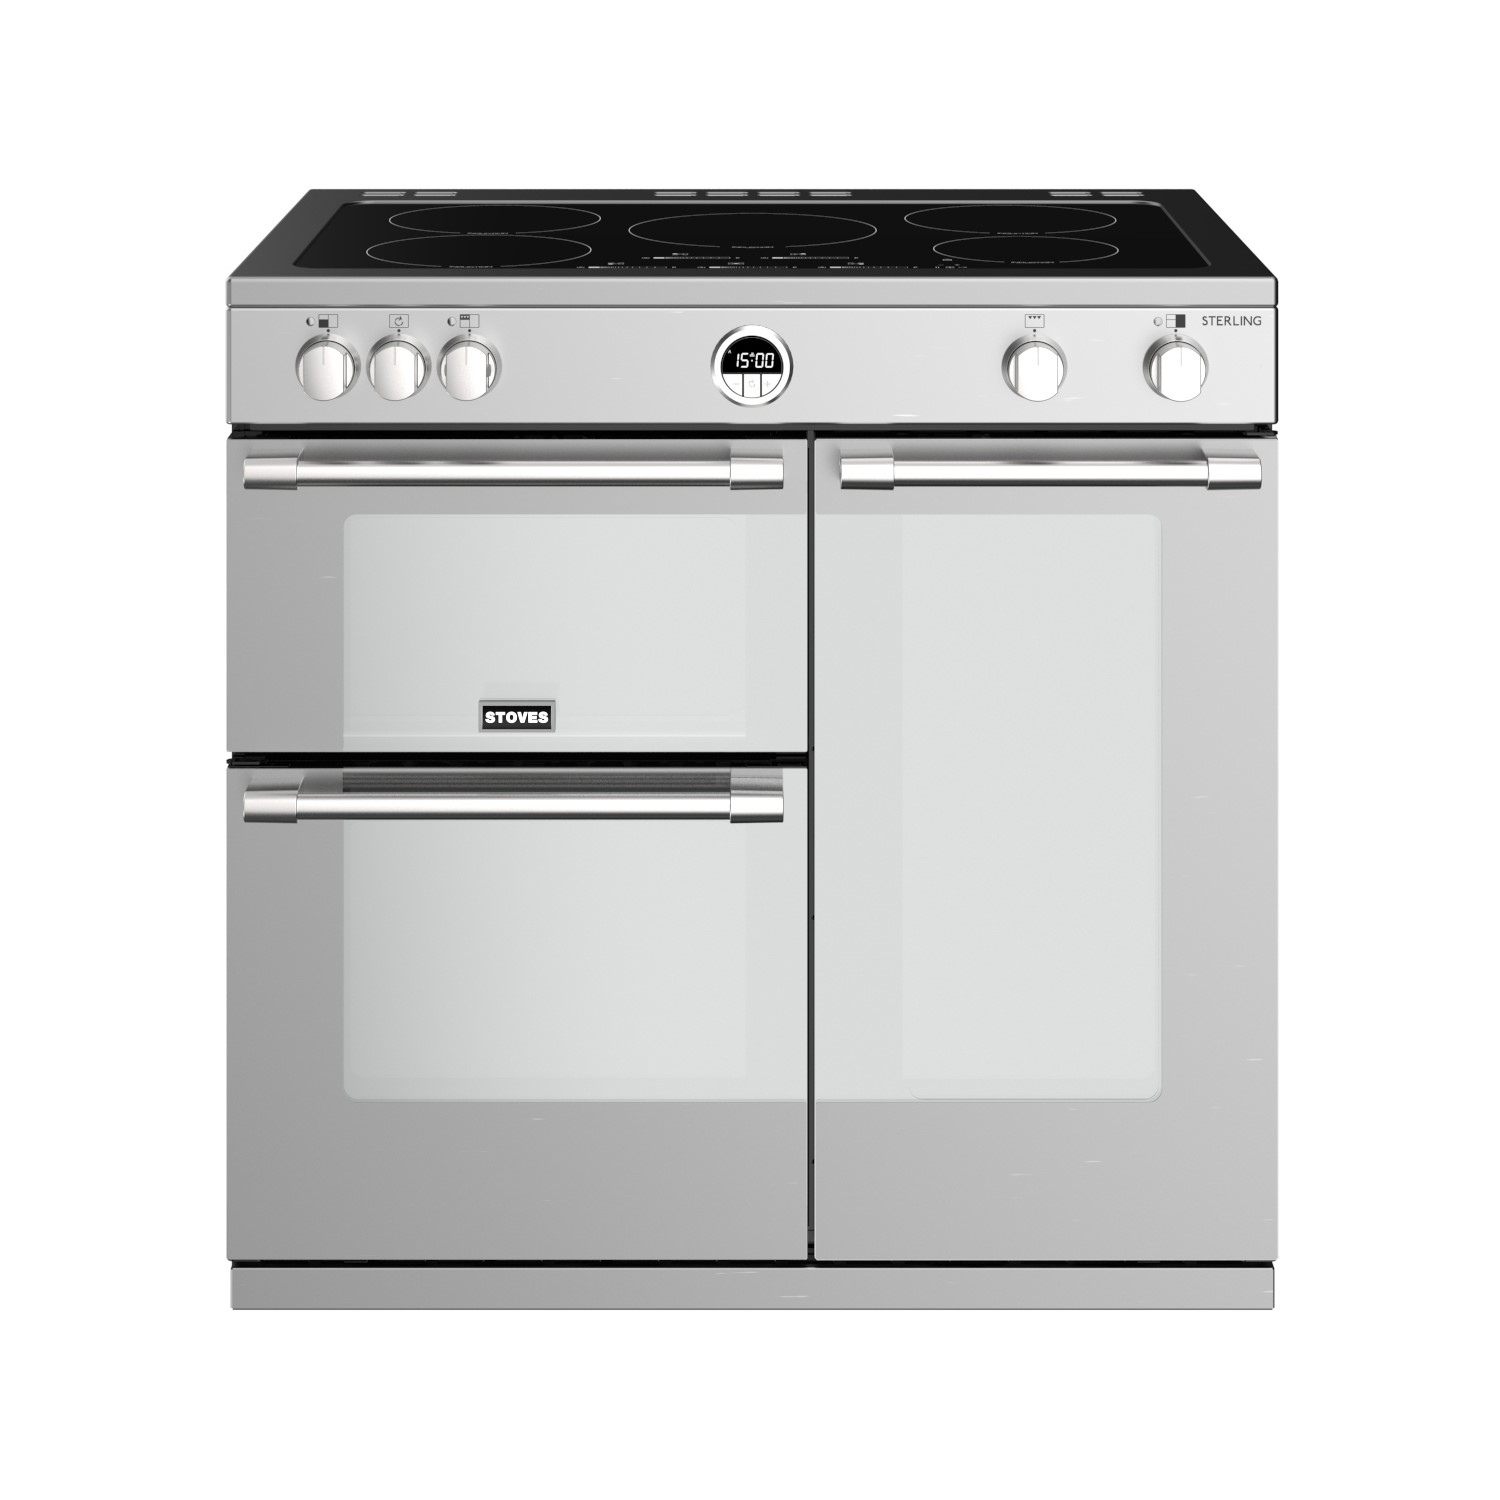 Stoves Sterling S900Ei 90cm Electric Range Cooker with Induction Hob - Stainless Steel